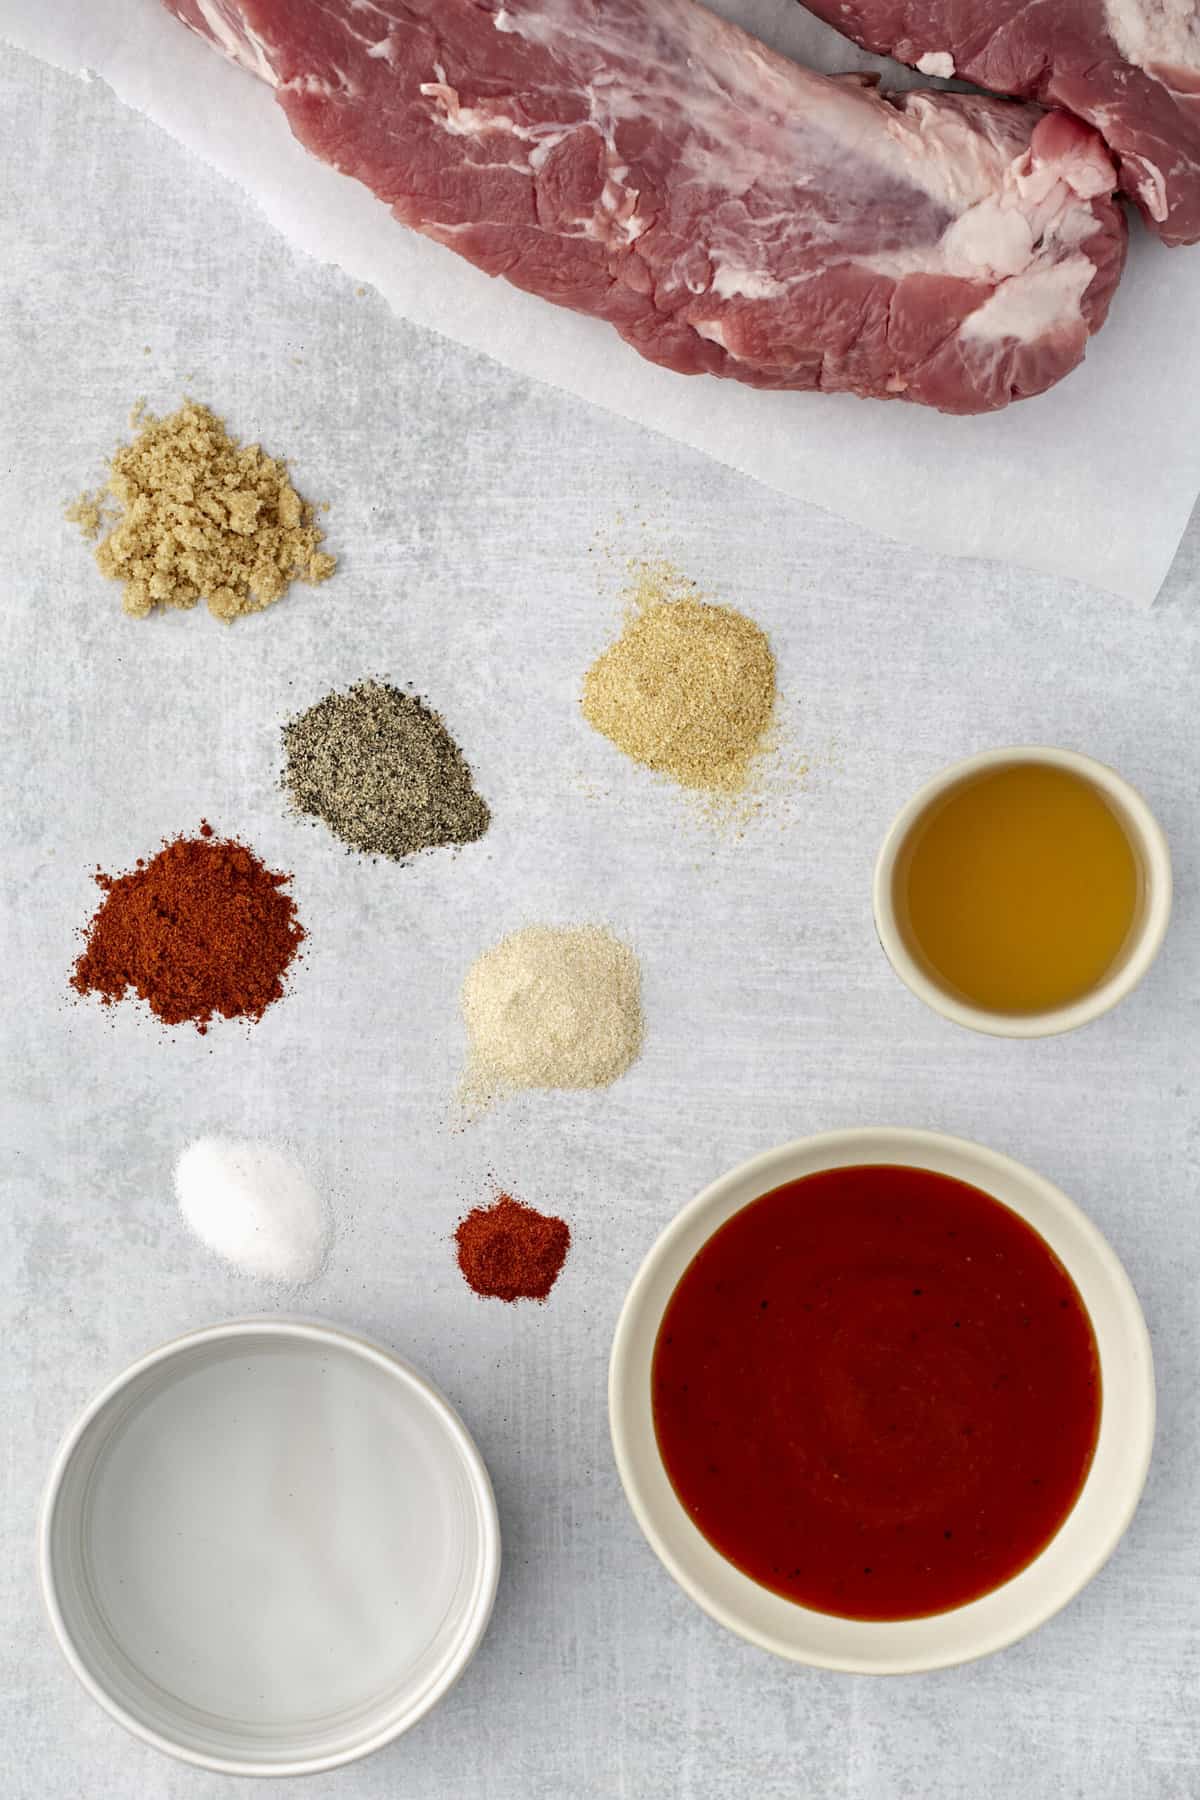 The ingredients for pulled pork are placed on a white surface.